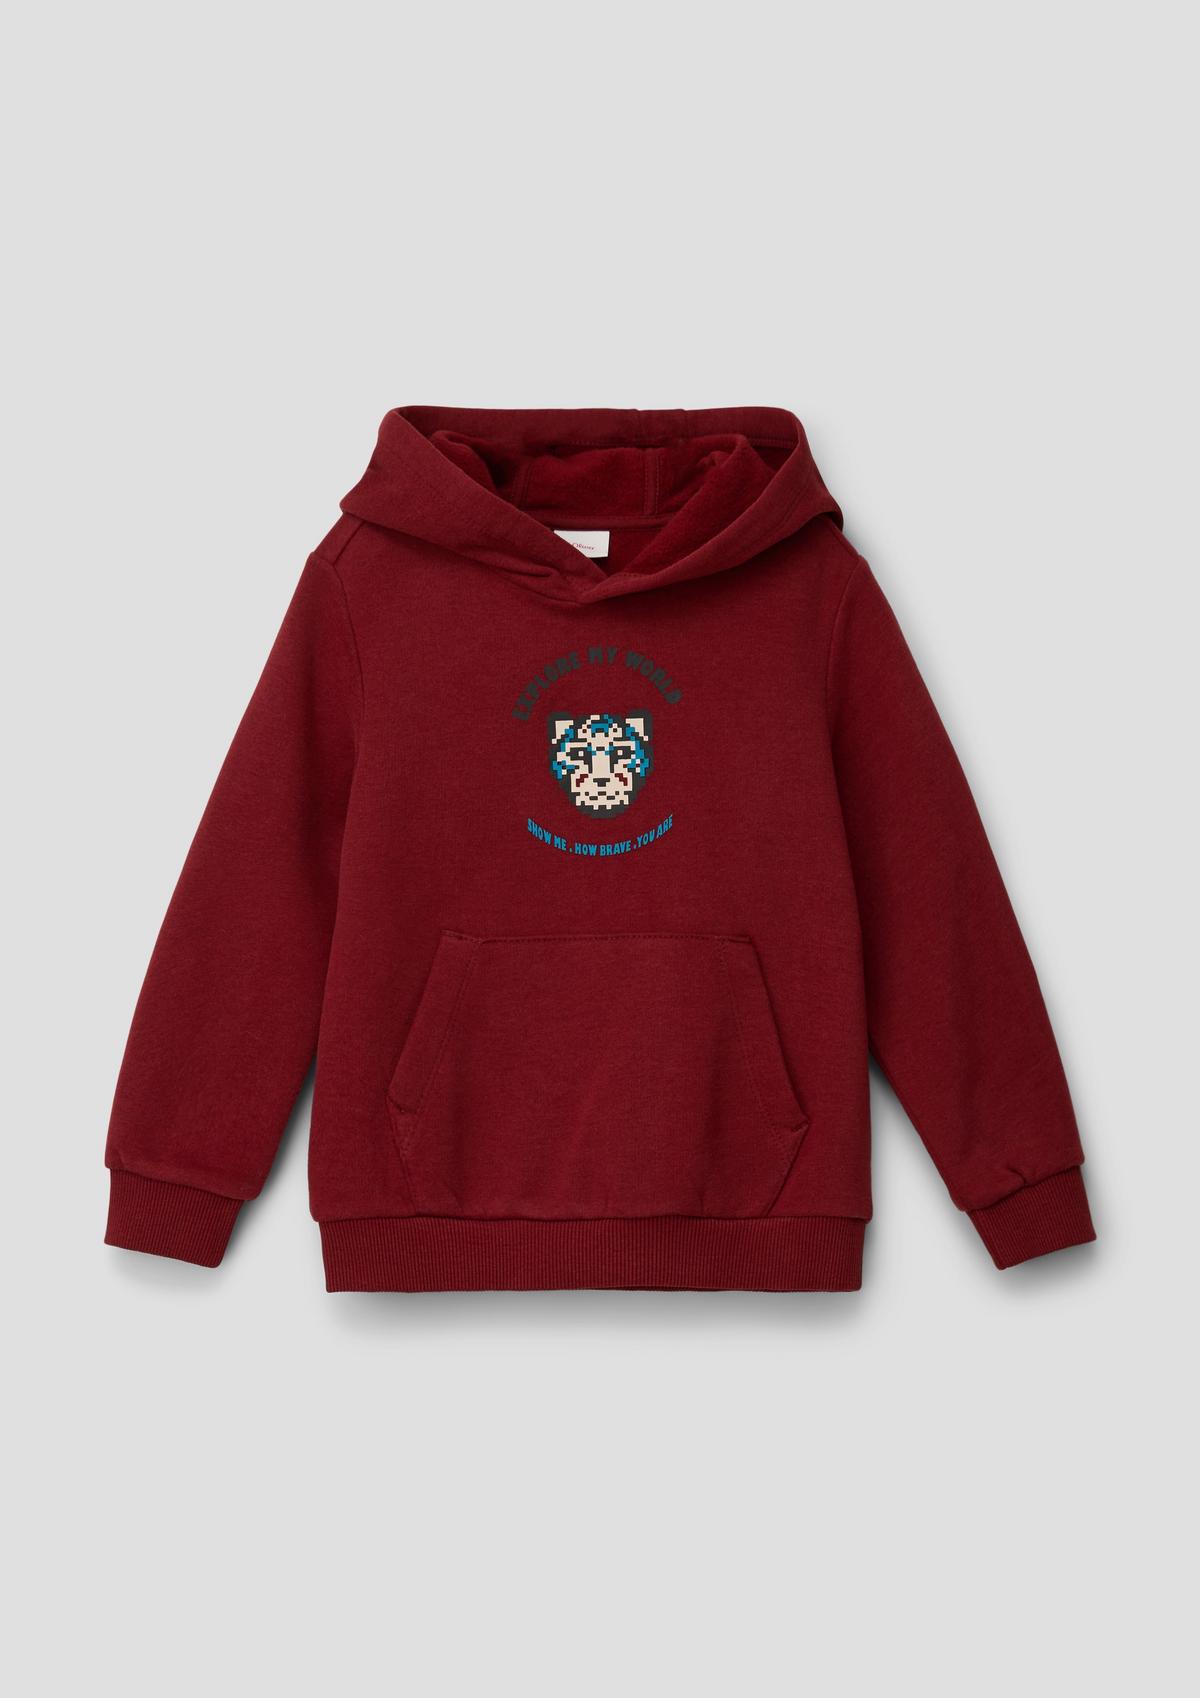 Sweatshirts and knitwear online for boys